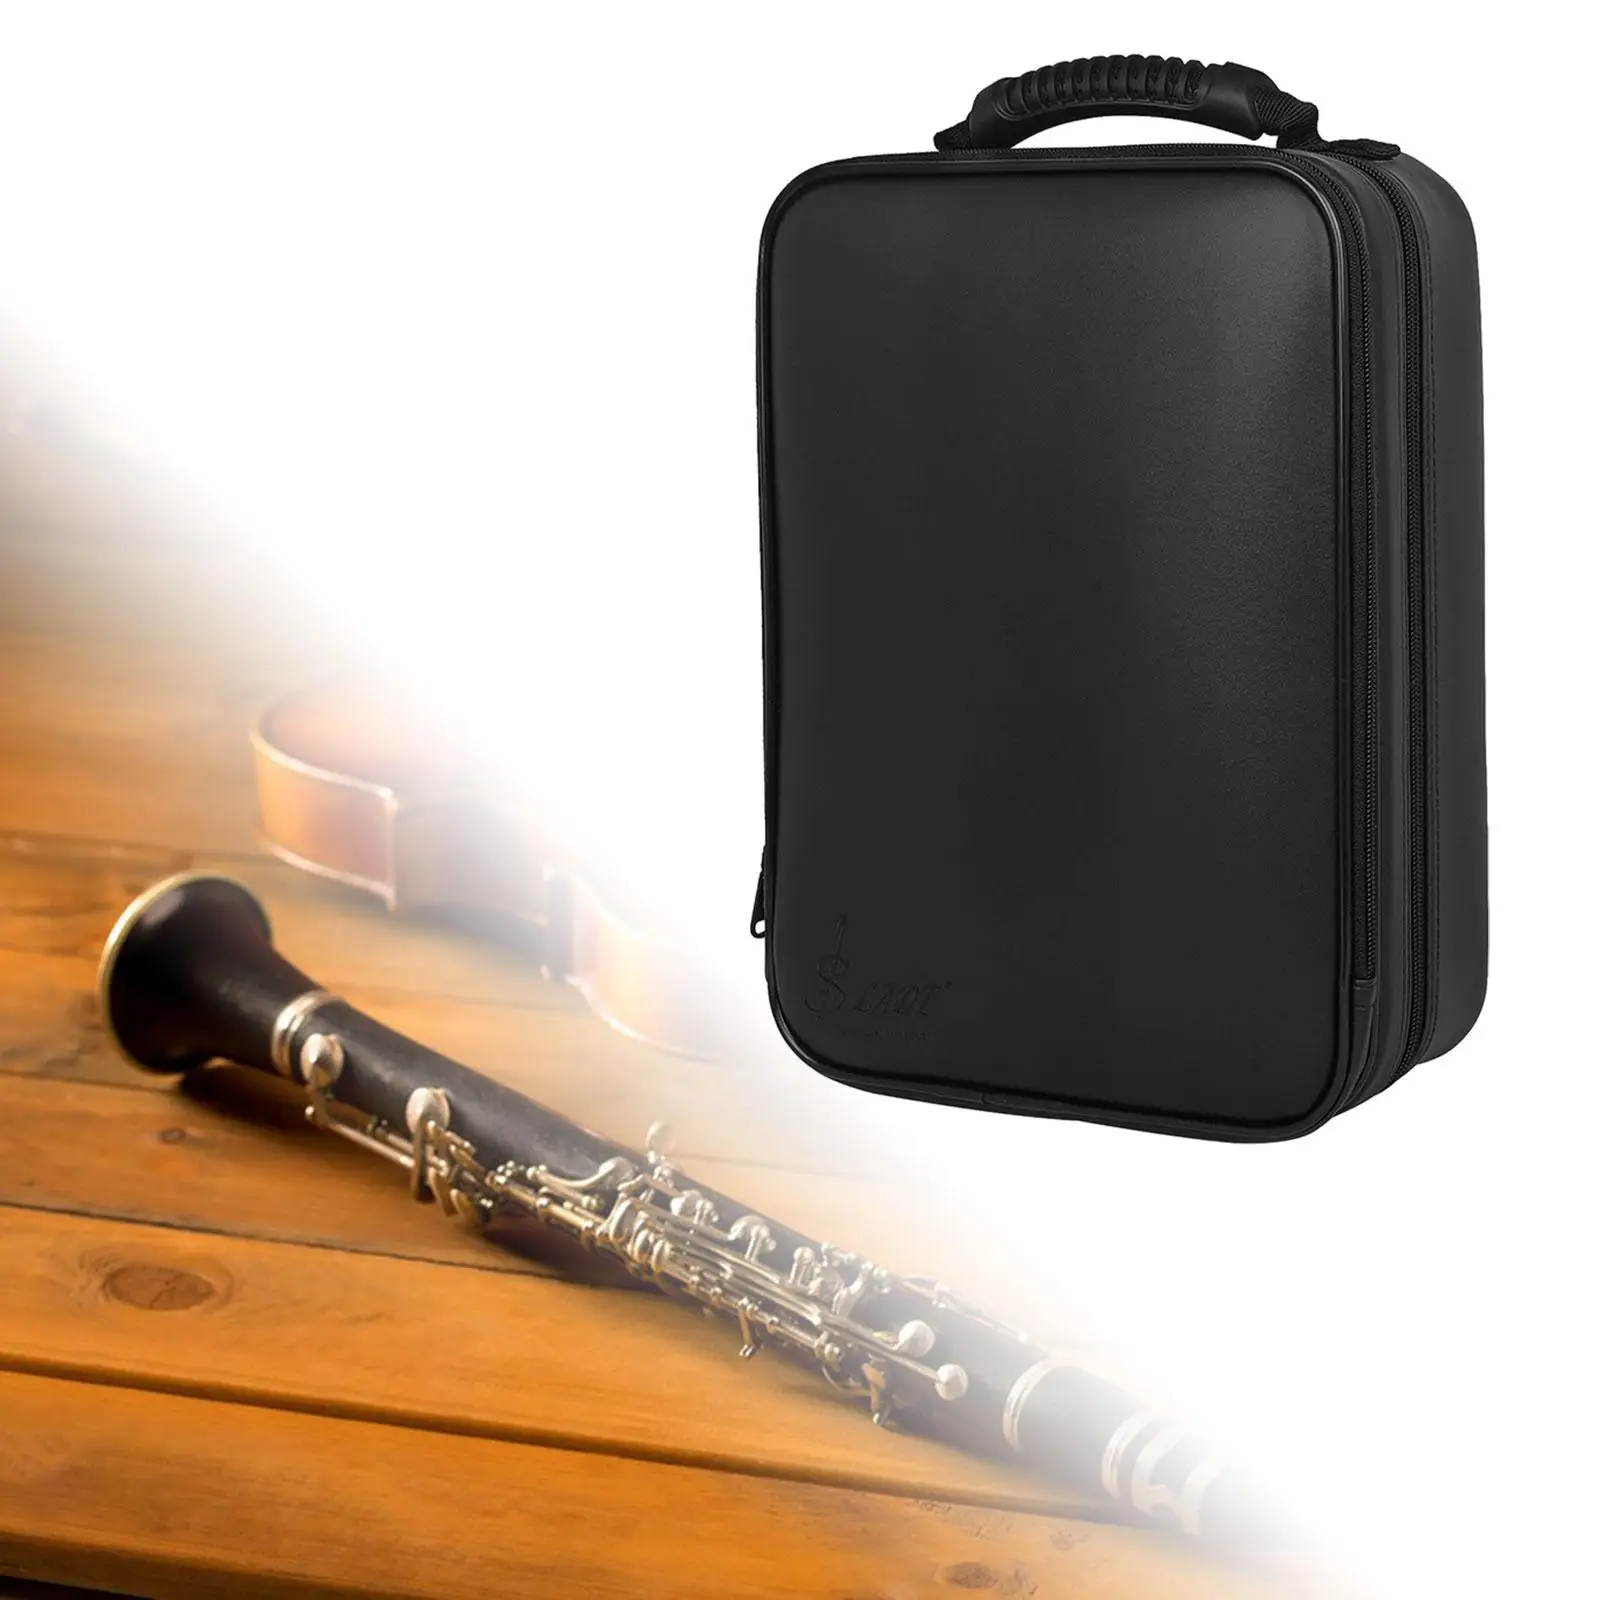 Clarinet Case Clarinet Gig Bag Beginner Case, Durable, Storage Box, PU Leather with Shoulder Strap for Travel Outdoor